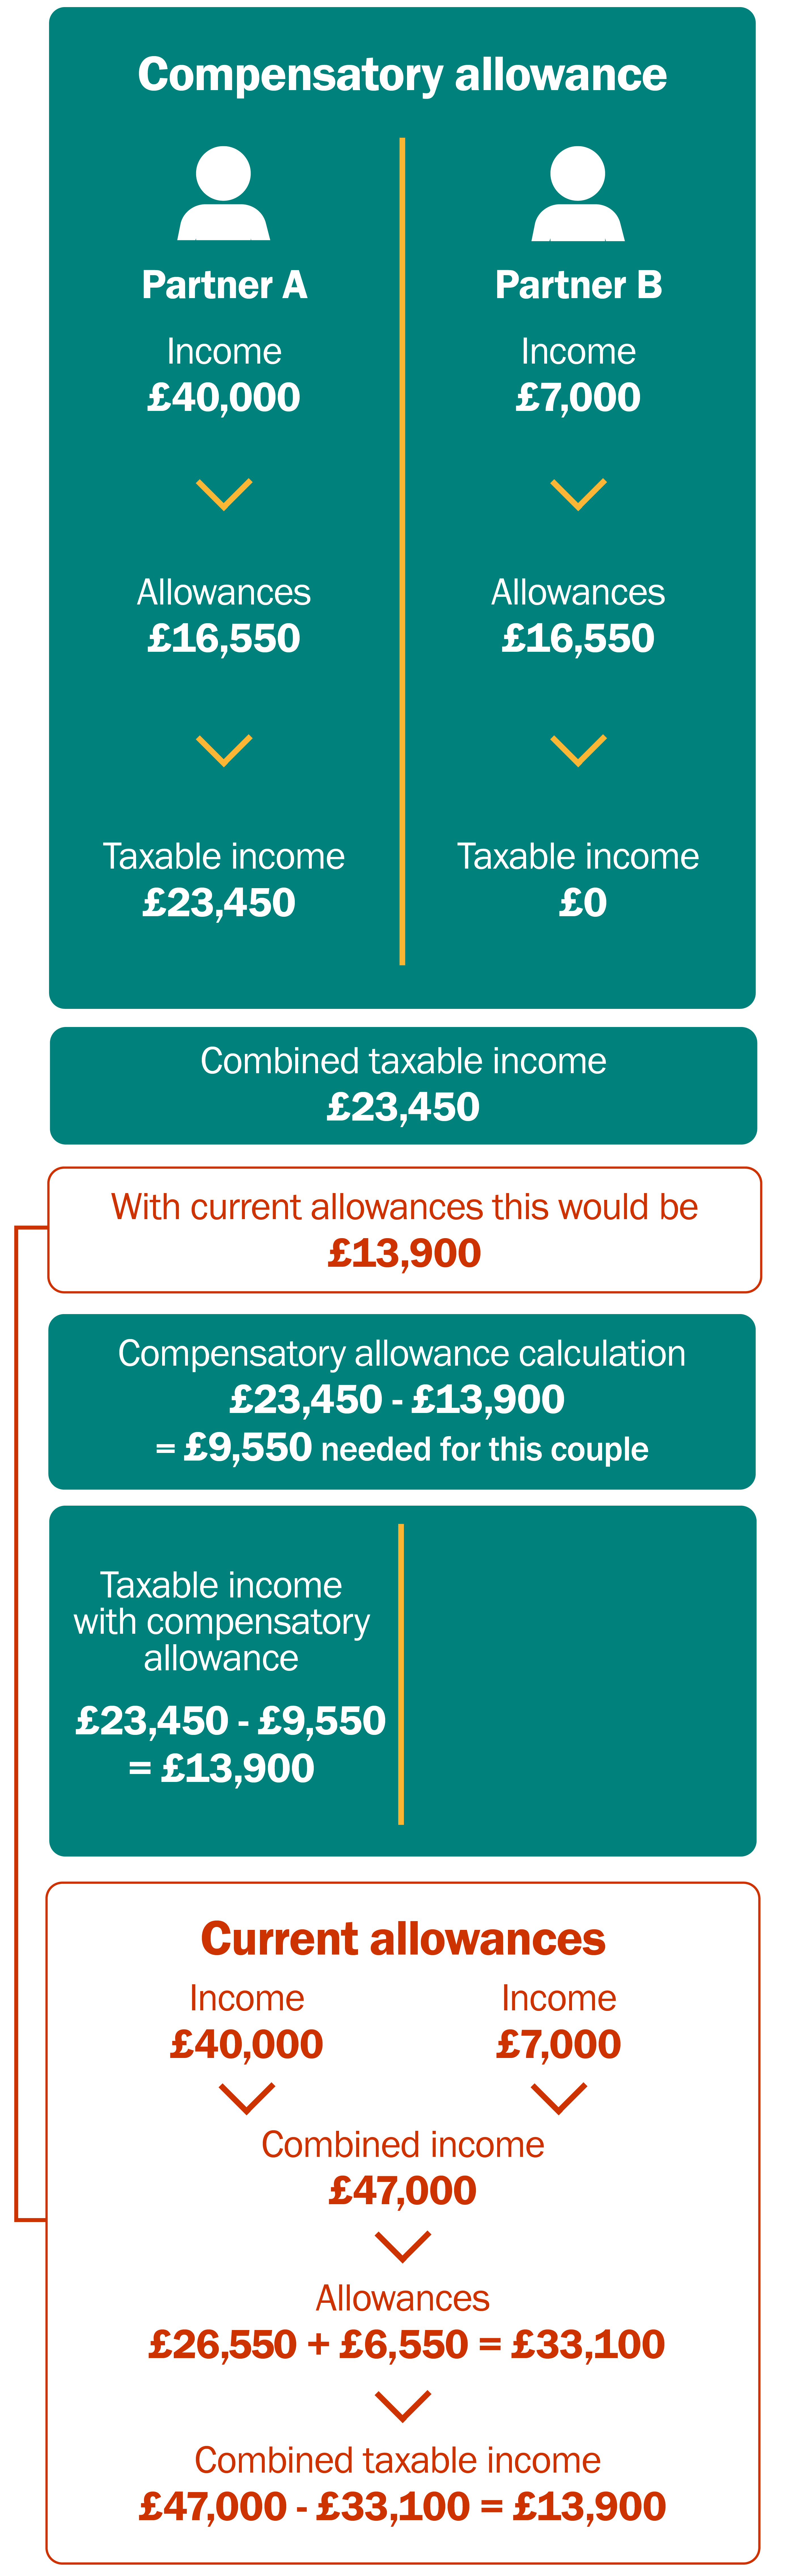 An illustration that shows how the compensatory allowance for a married couple or civil partner's will stop them being worse off